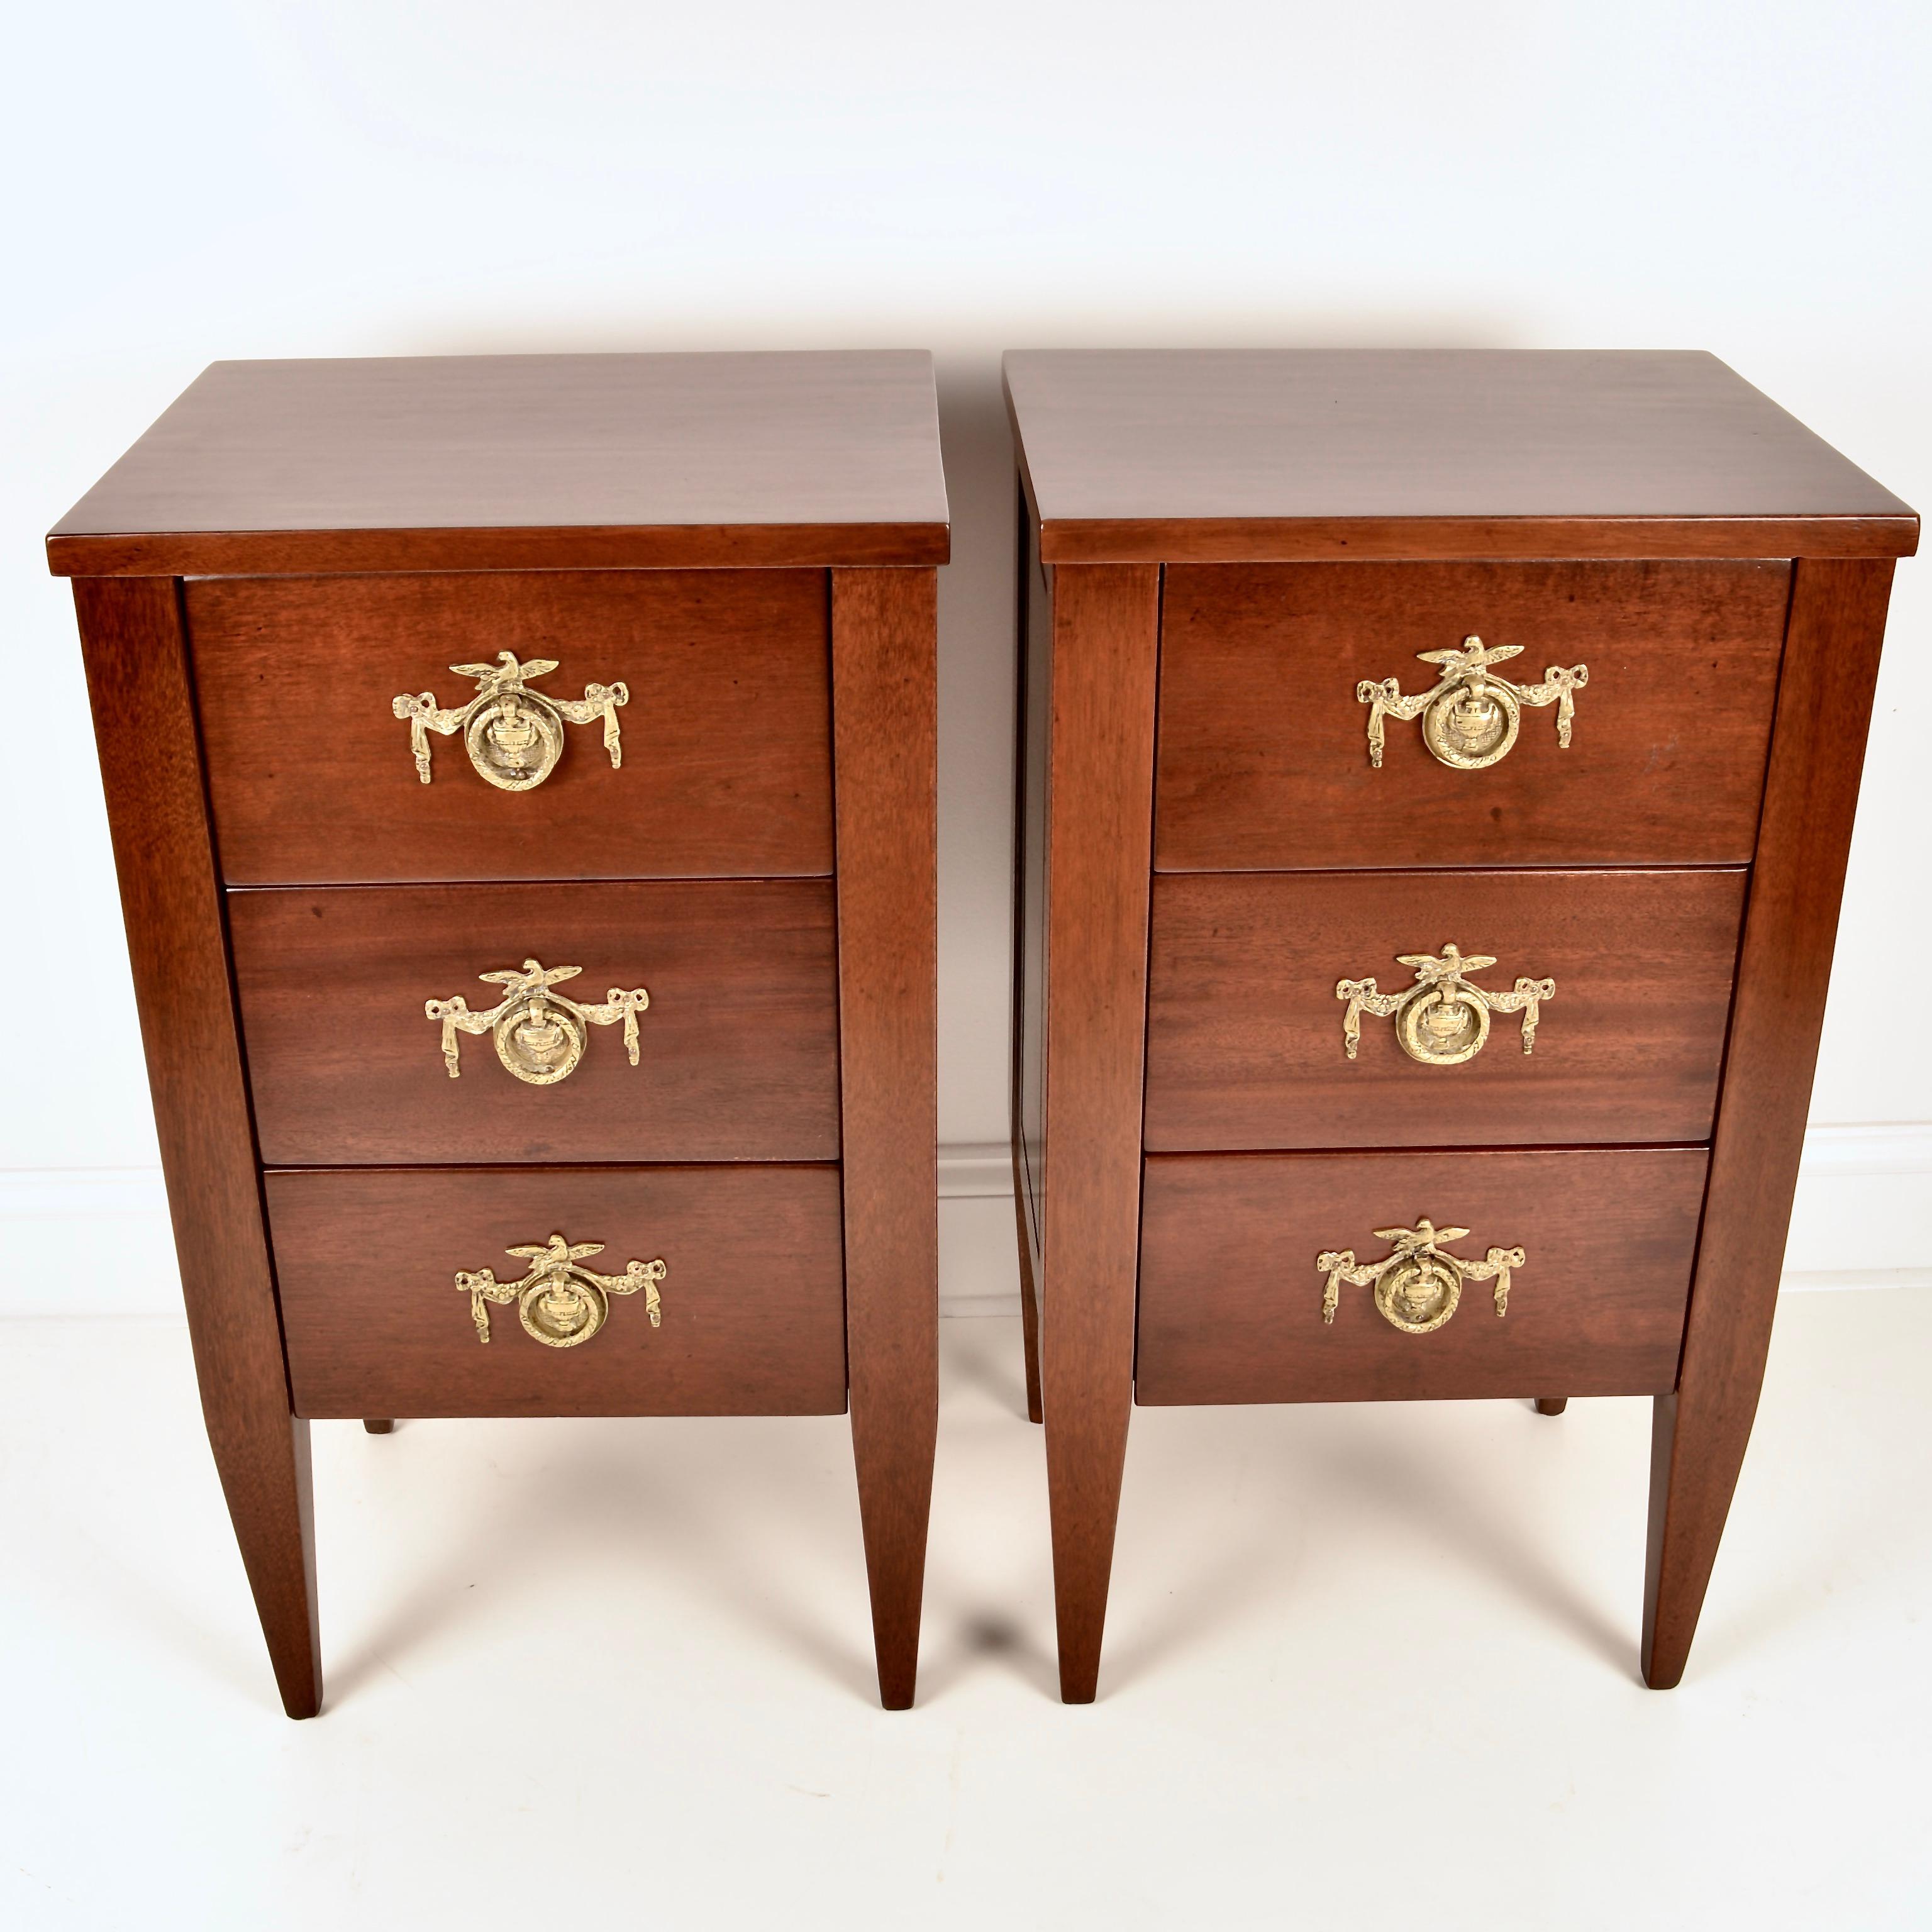 A pair of small chests, perfect for bedside or other side tables. Each has 3 drawers stylishly lined in the Ruseau signature style with vintage wall paper. Solid brass neoclassical hardware. This pair has been fully restored to original mahogany